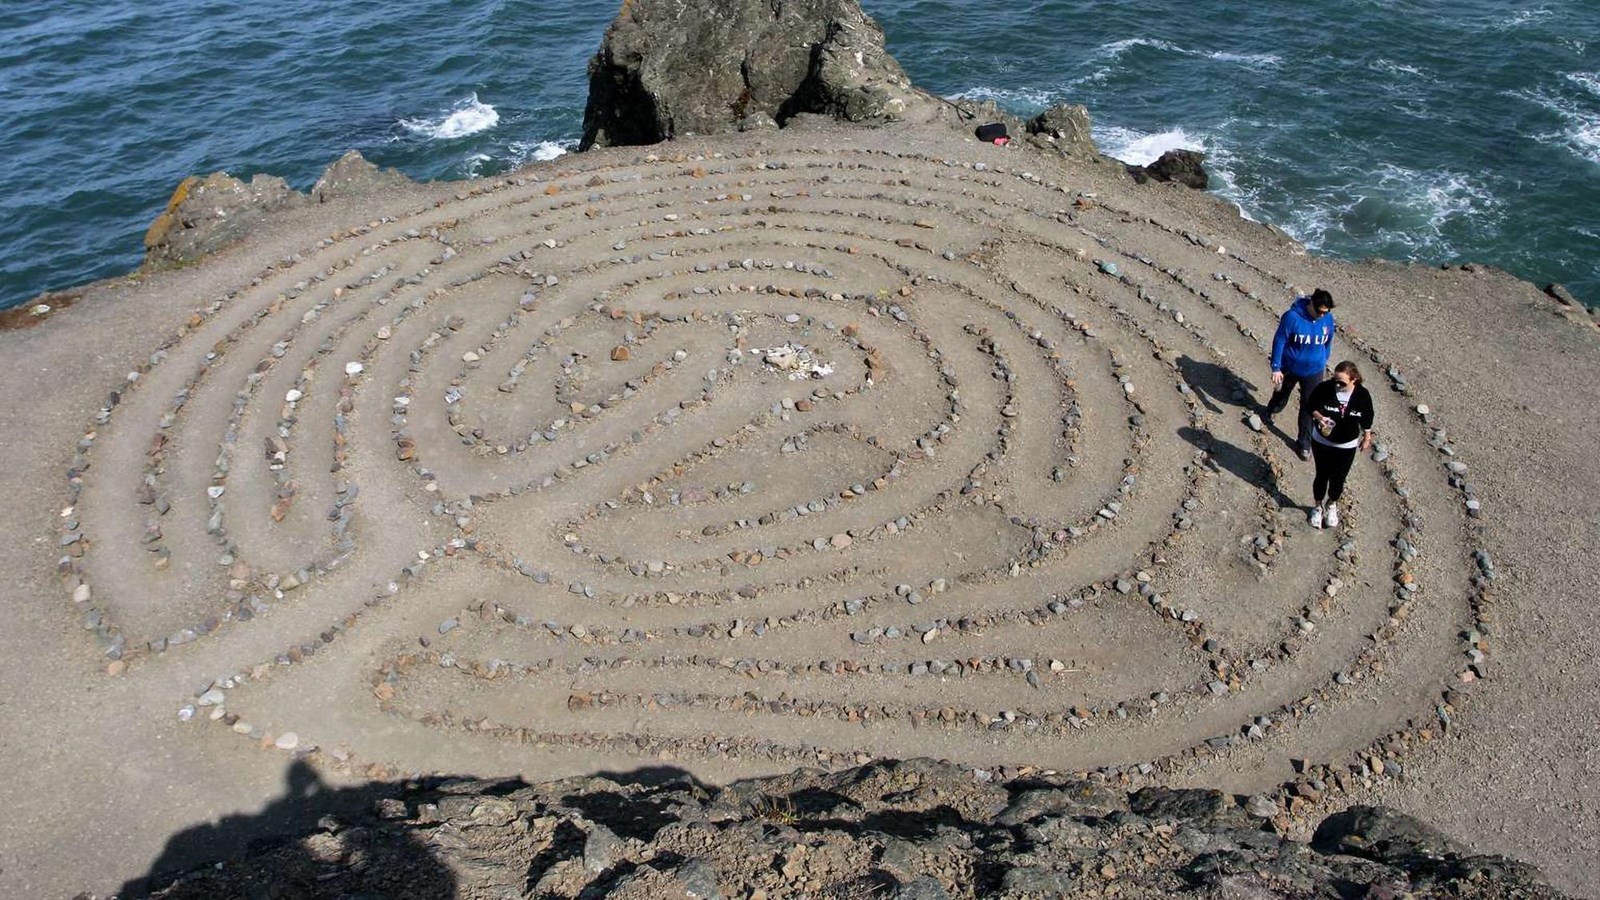 Lands End Point and the Labyrinth (U.S. National Park Service)